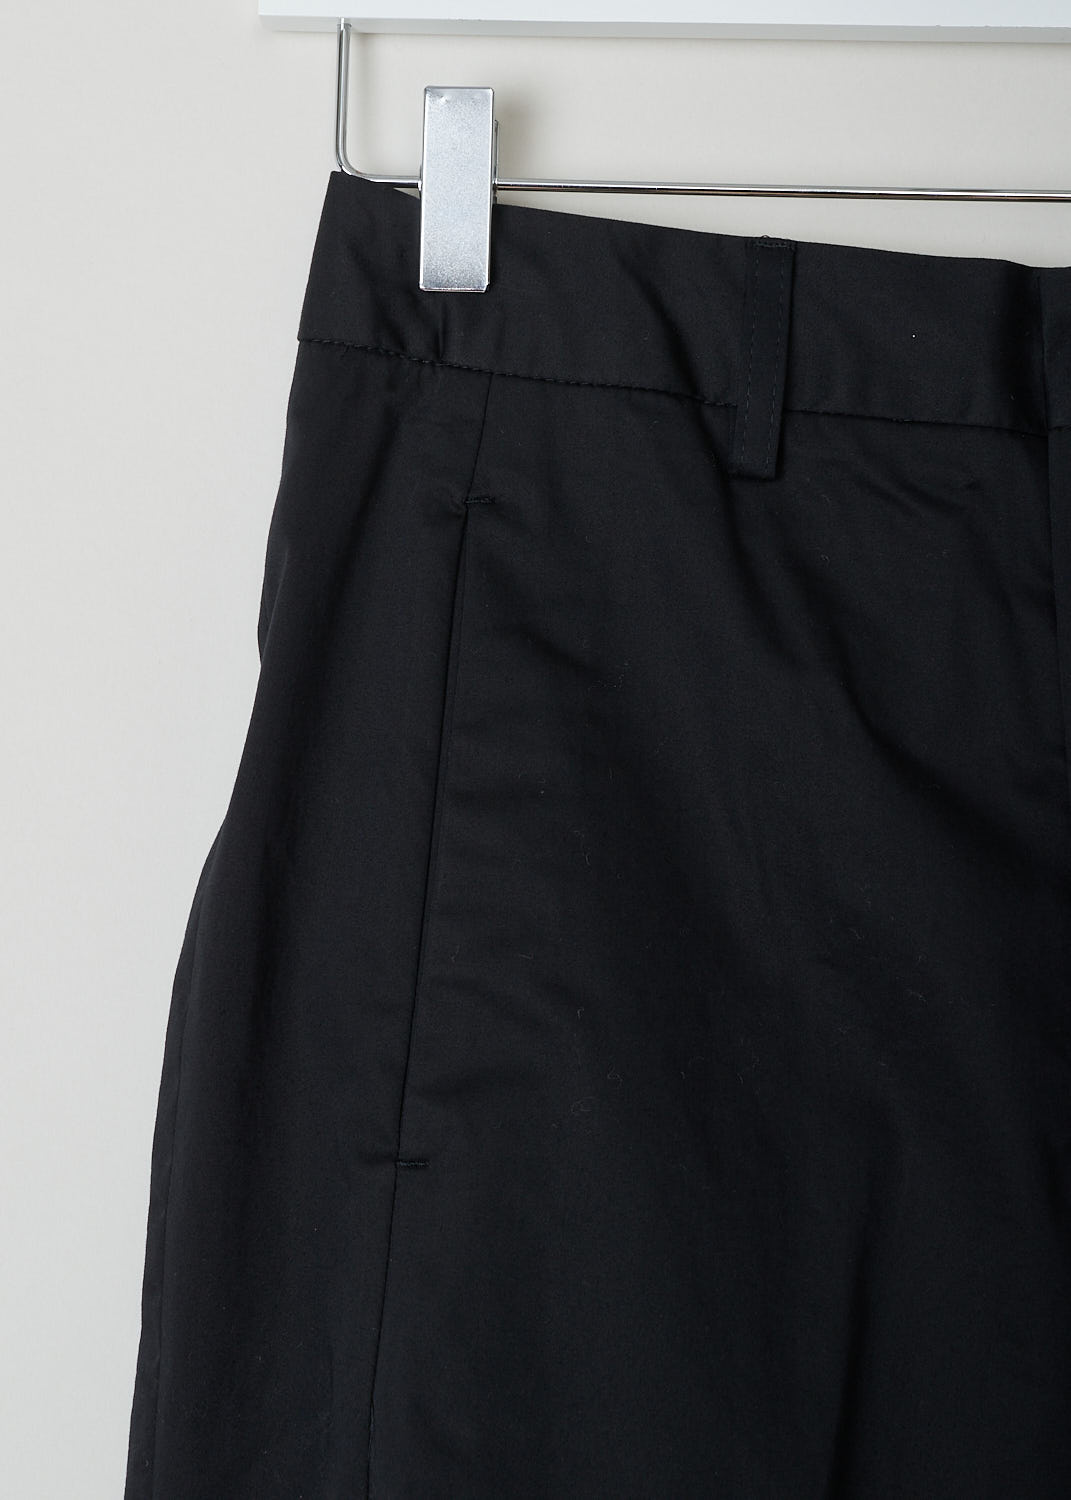 CLOSED, STURDY BLACK TROUSERS, LUDWIG_C91045_31S_22_100, Black, Detail, These sturdy black trousers feature a regular length, a concealed clasp and zipper, two forward slanted pockets on the front and two welt pockets on the back.